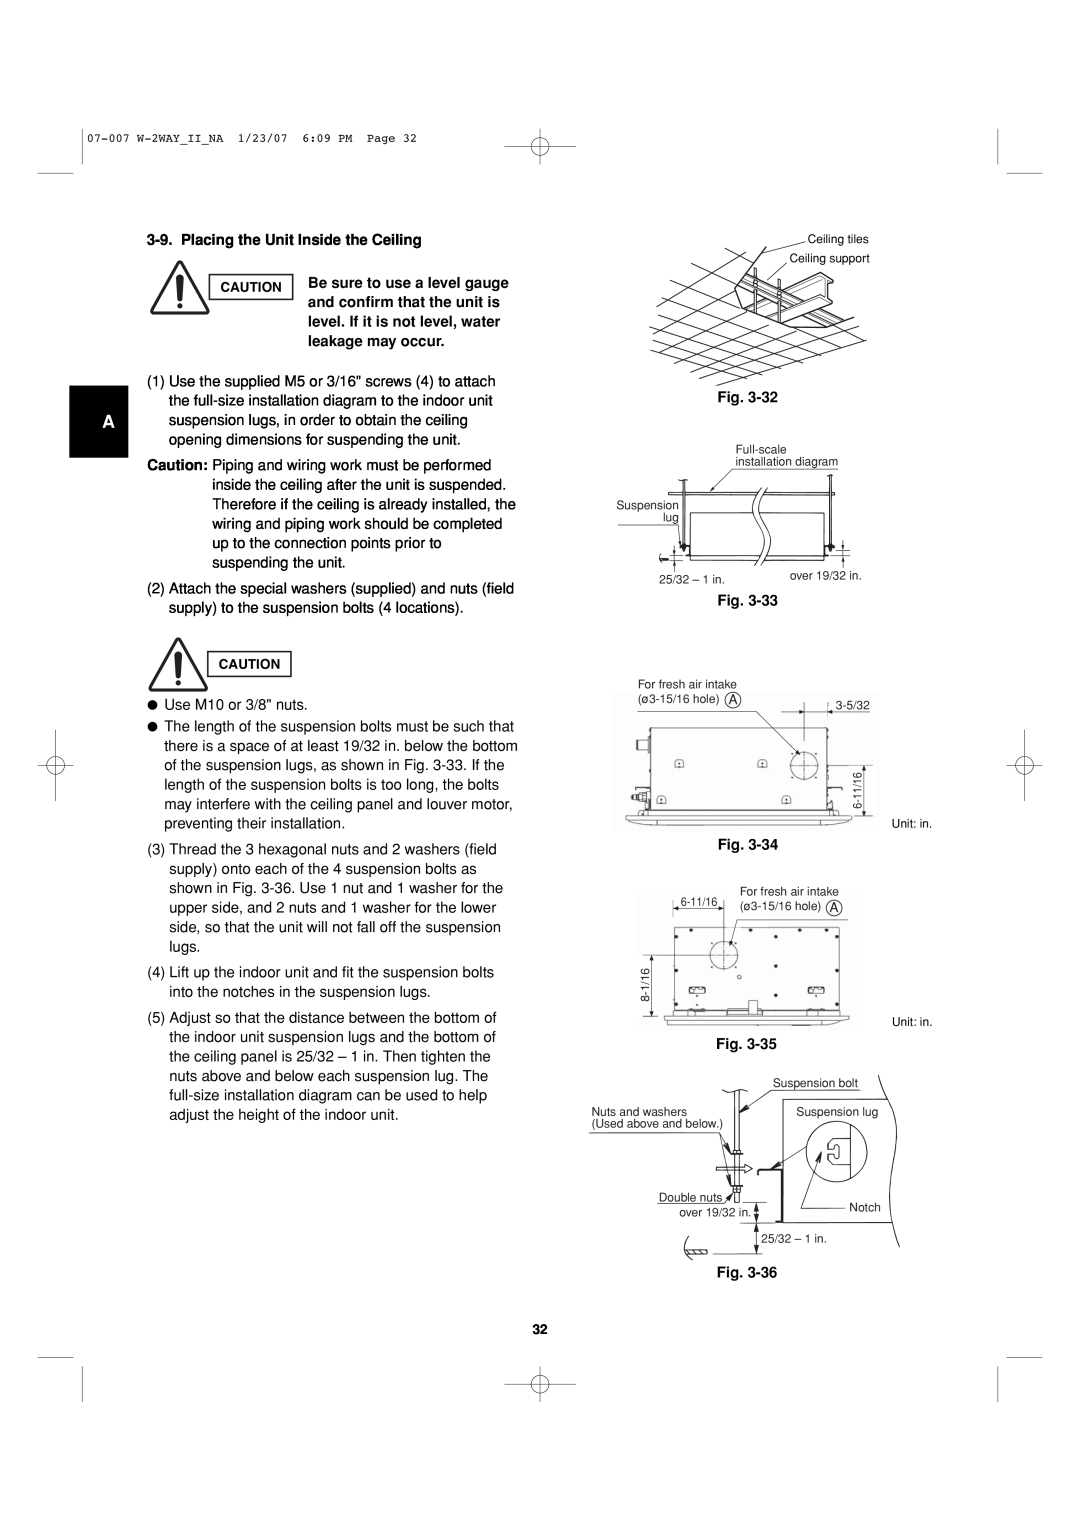 Sanyo 85464359982001 installation instructions Placing the Unit Inside the Ceiling, Fig 